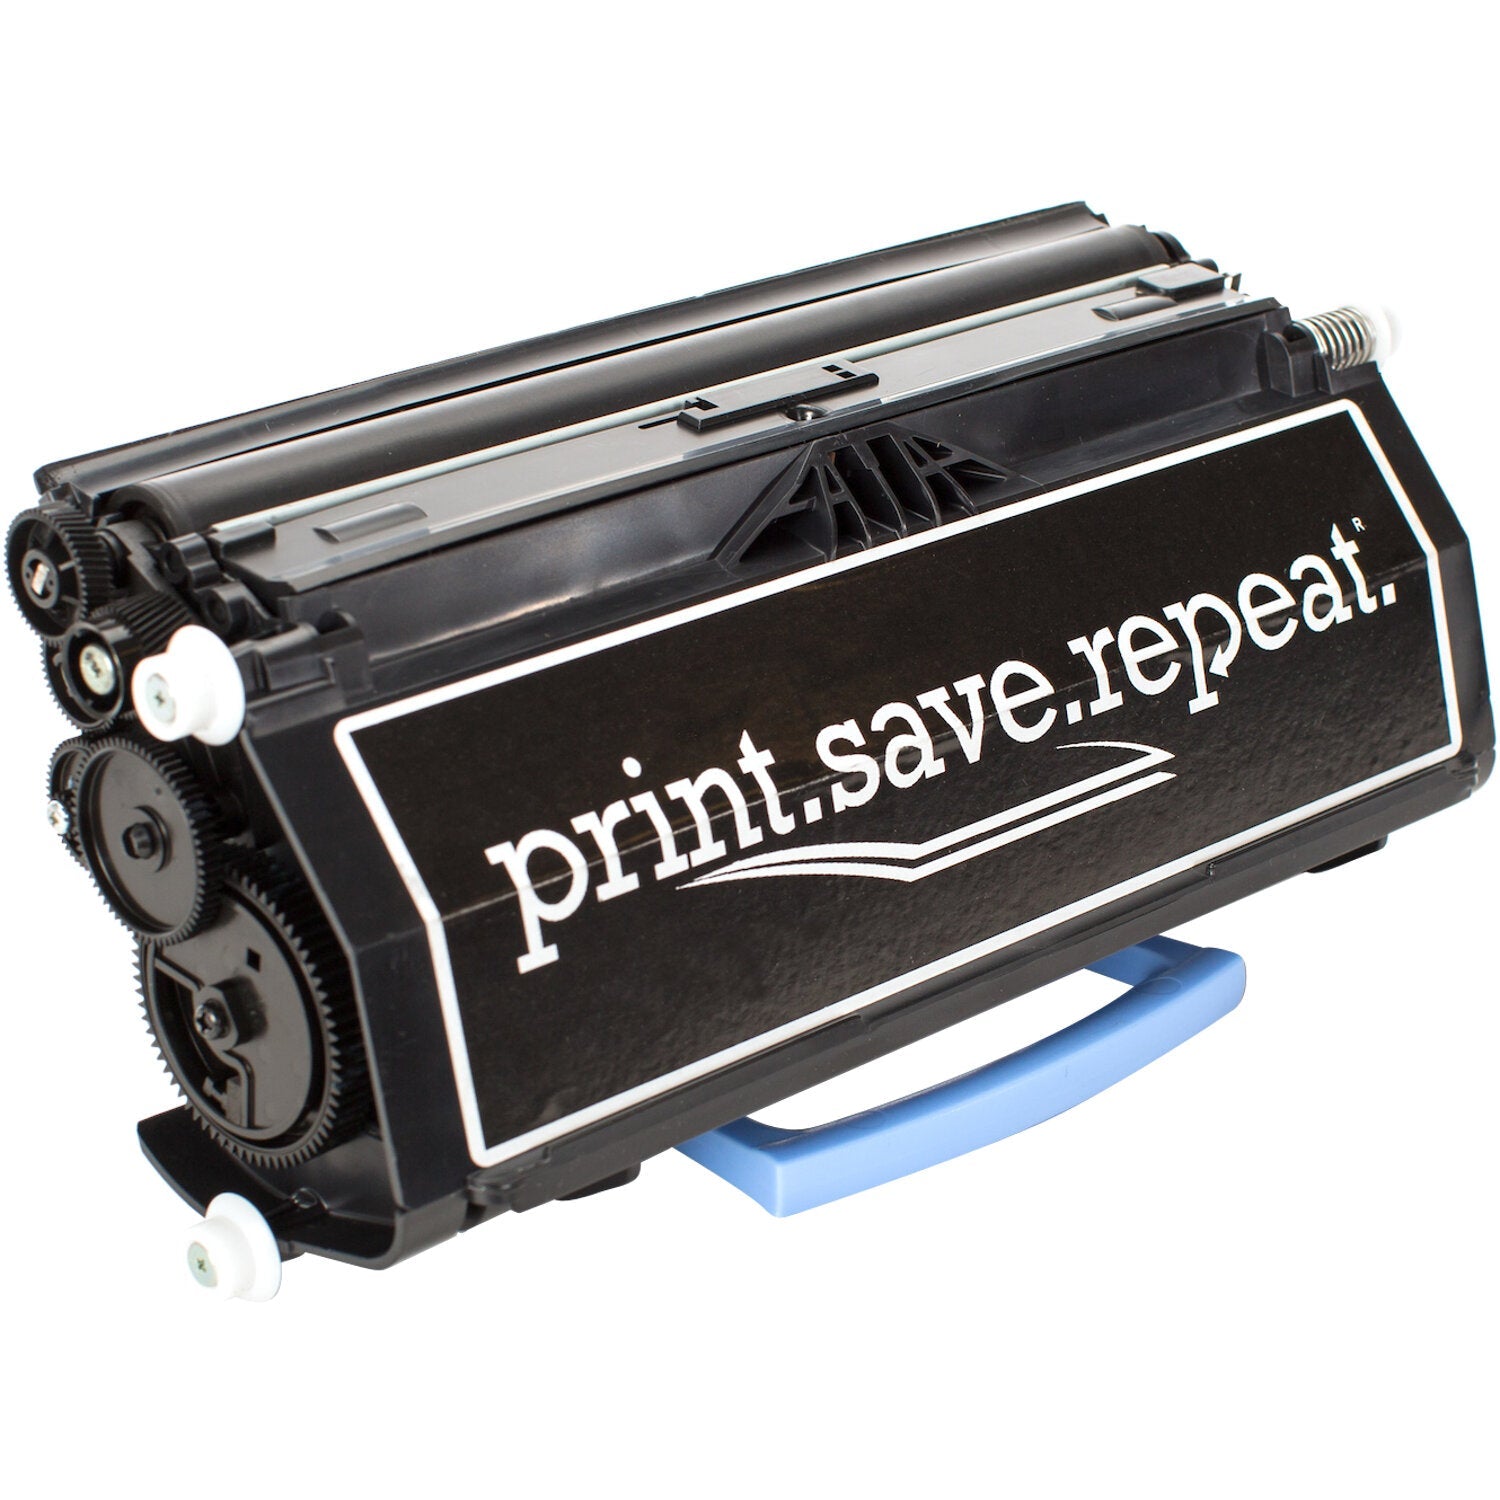 Print.Save.Repeat. Lexmark E460X11A Extra High Yield Remanufactured Toner Cartridge for E460, E462 [15,000 Pages]